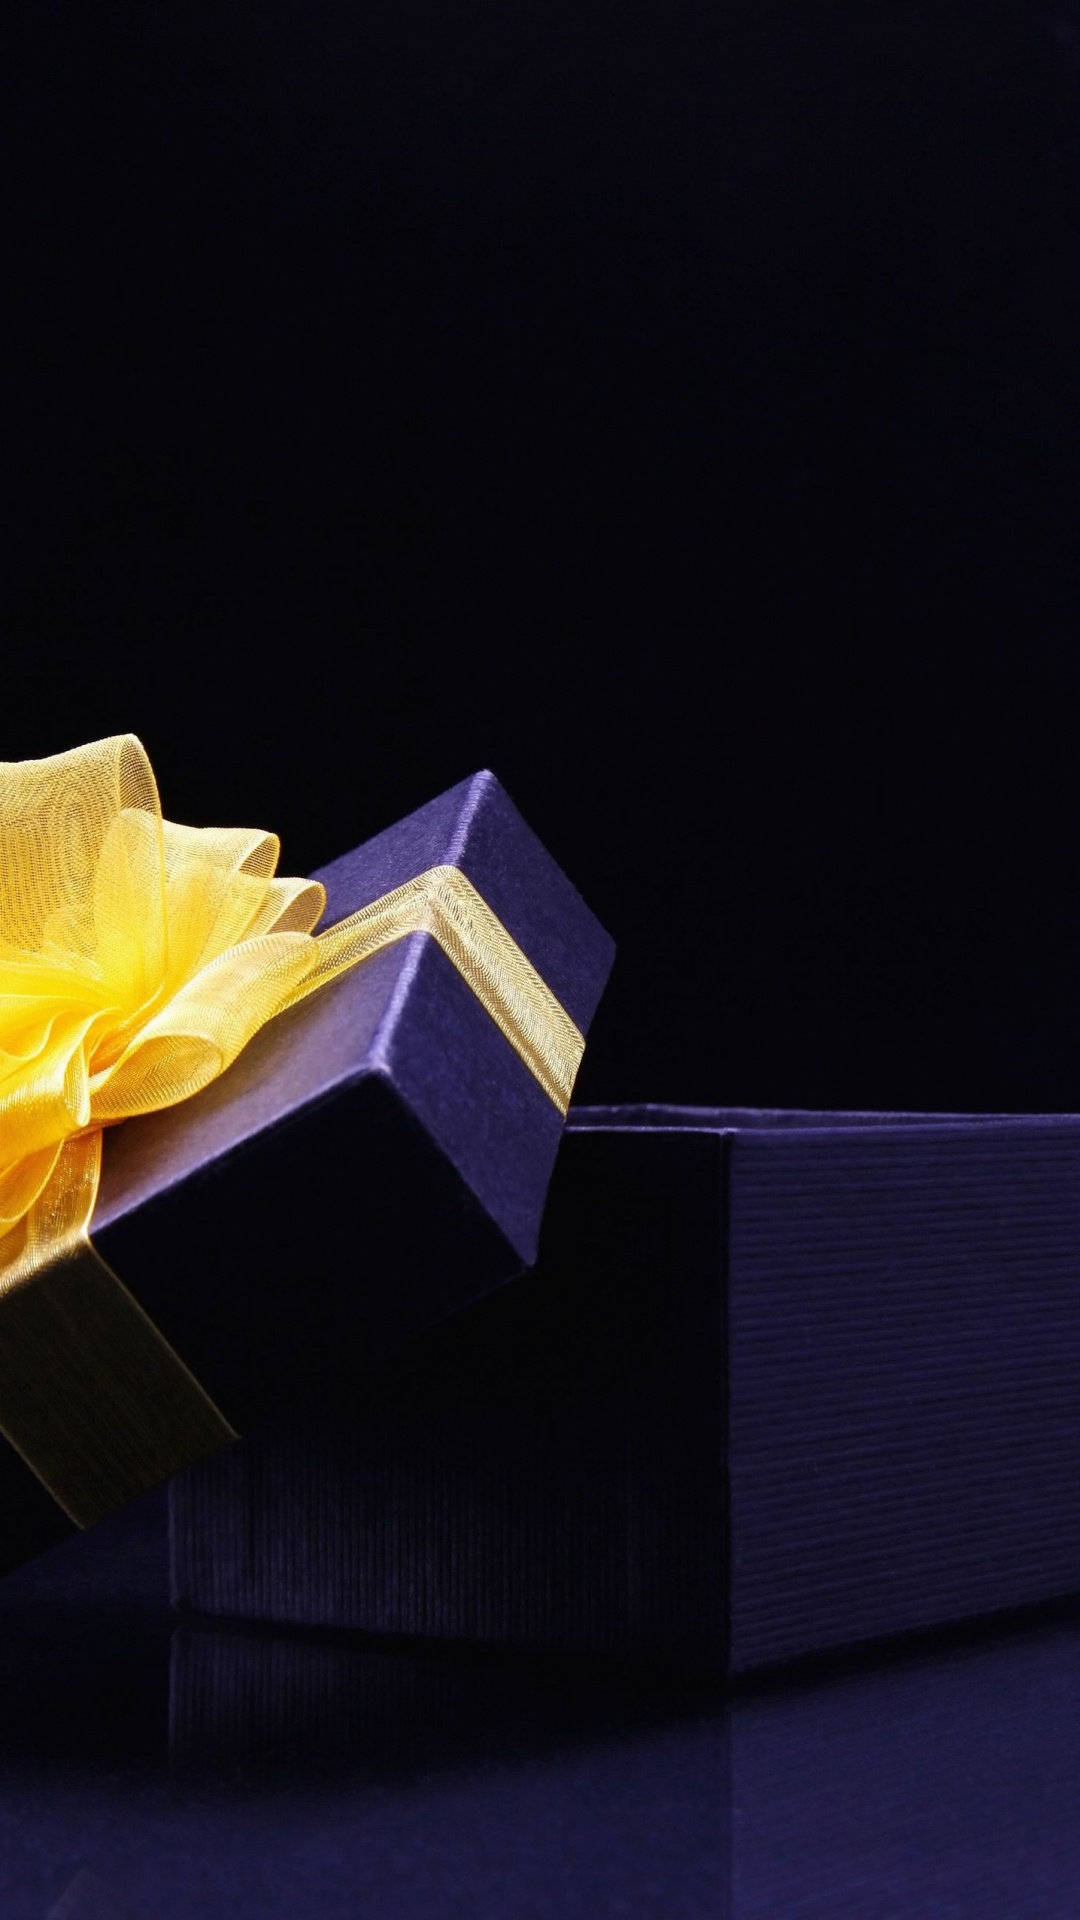 Gift, Christmas Gift, Origami, Light, Yellow. Wallpaper in 1080x1920 Resolution